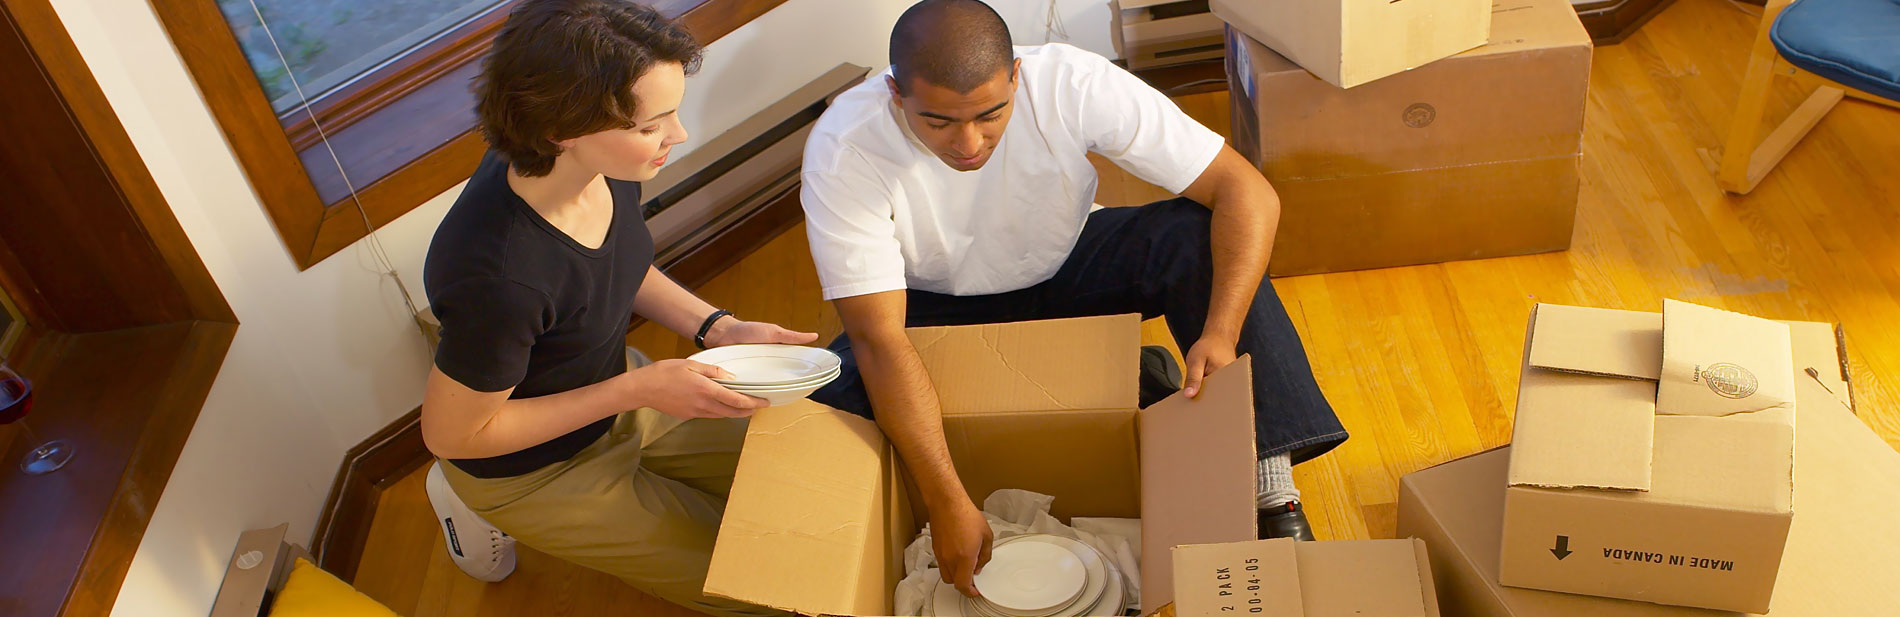 15 Tips Professionals Recommend for Downsizing